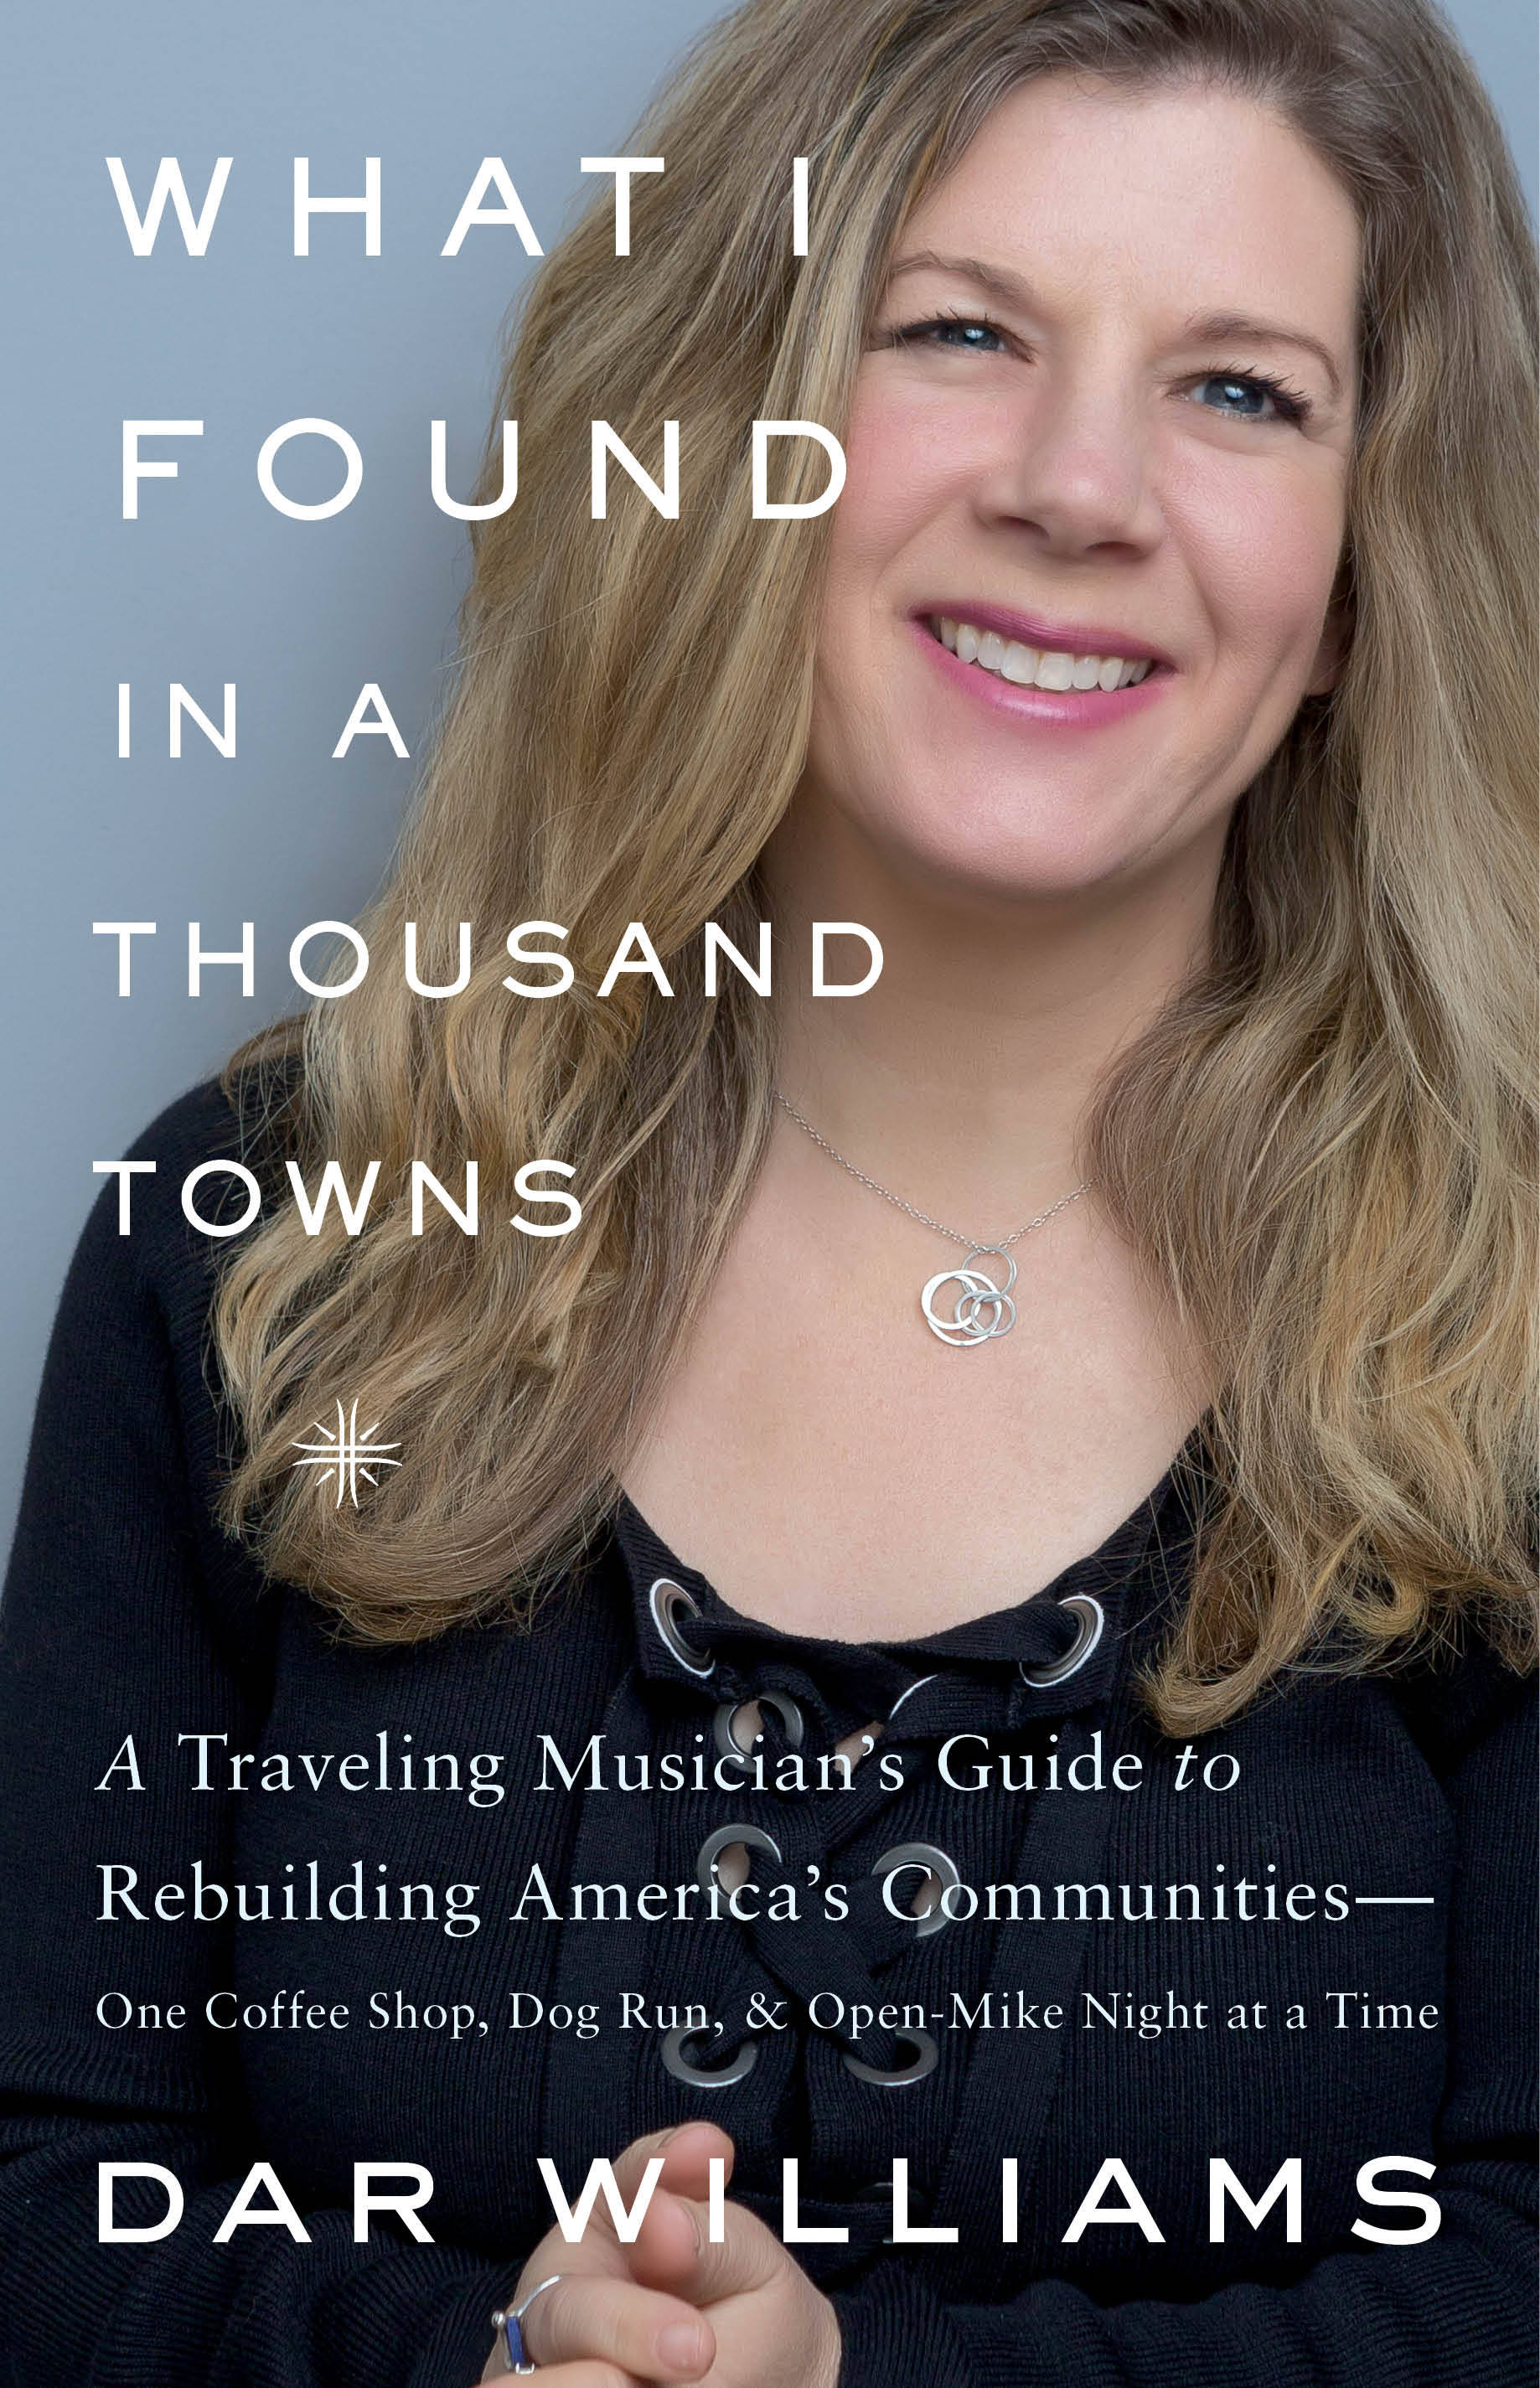 Dar Williams’ “What I Found in a Thousand Towns” (Basic Books, September 2017, $27)